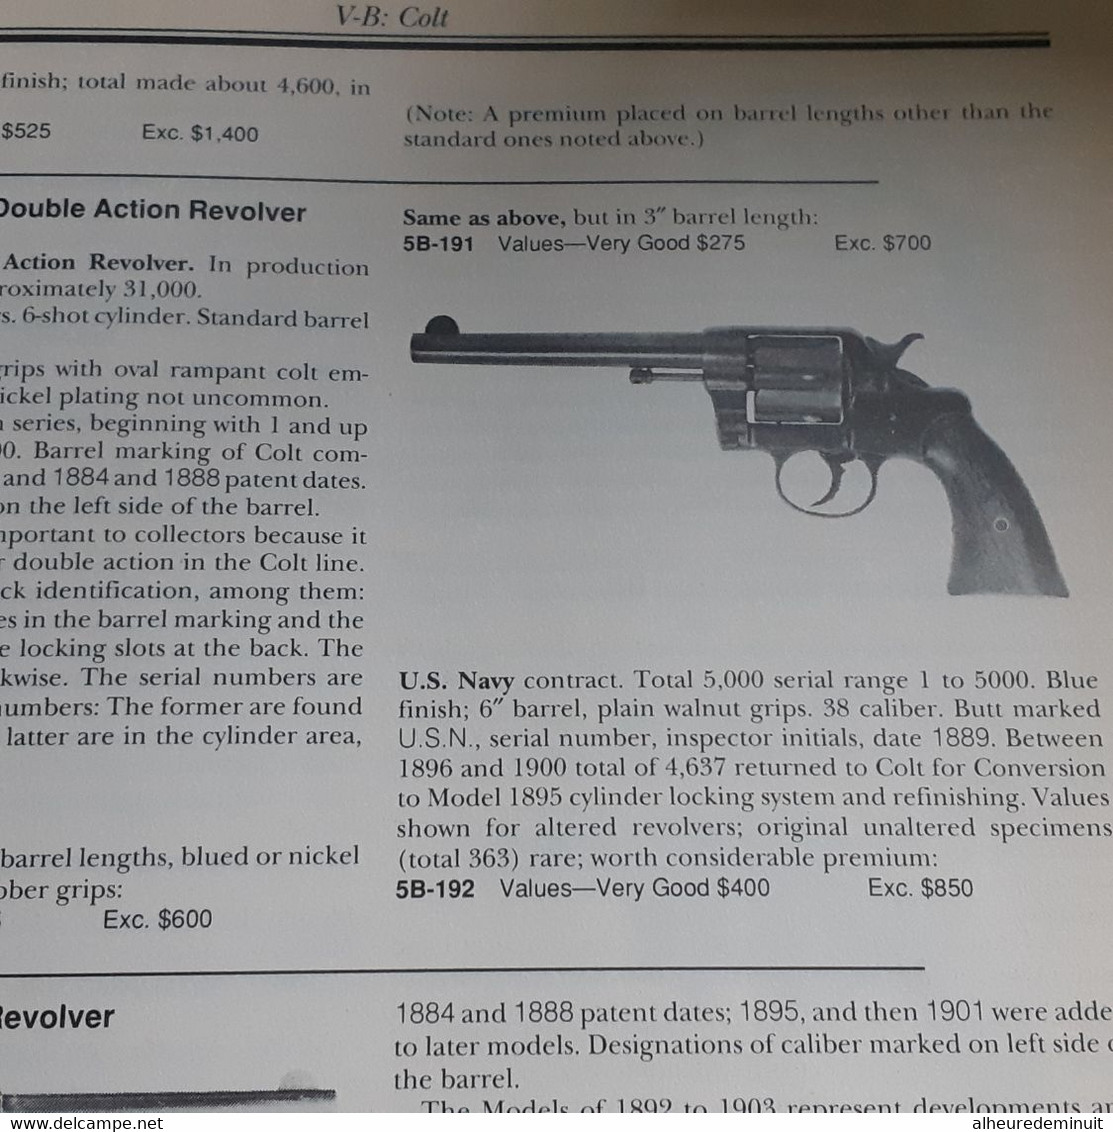 Flayderman's Guide To Antique American Firearms"1990"Armes"fusils"révolvers"complete Handbook Of American Gun Collecting - Forces Armées Américaines